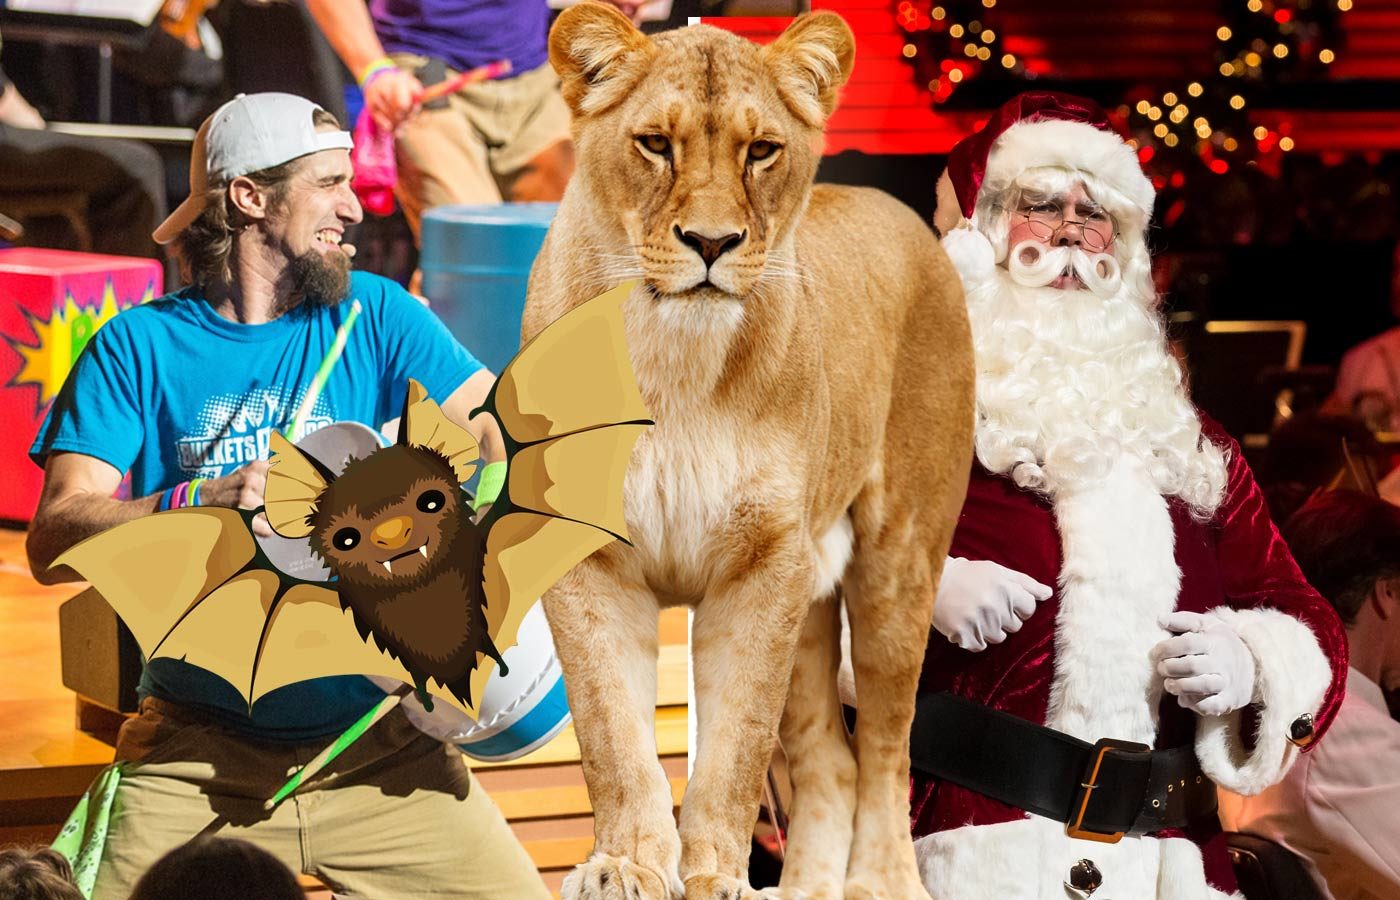 Photo collage of Bucket N Boards, a bat, lion and Santa Claus